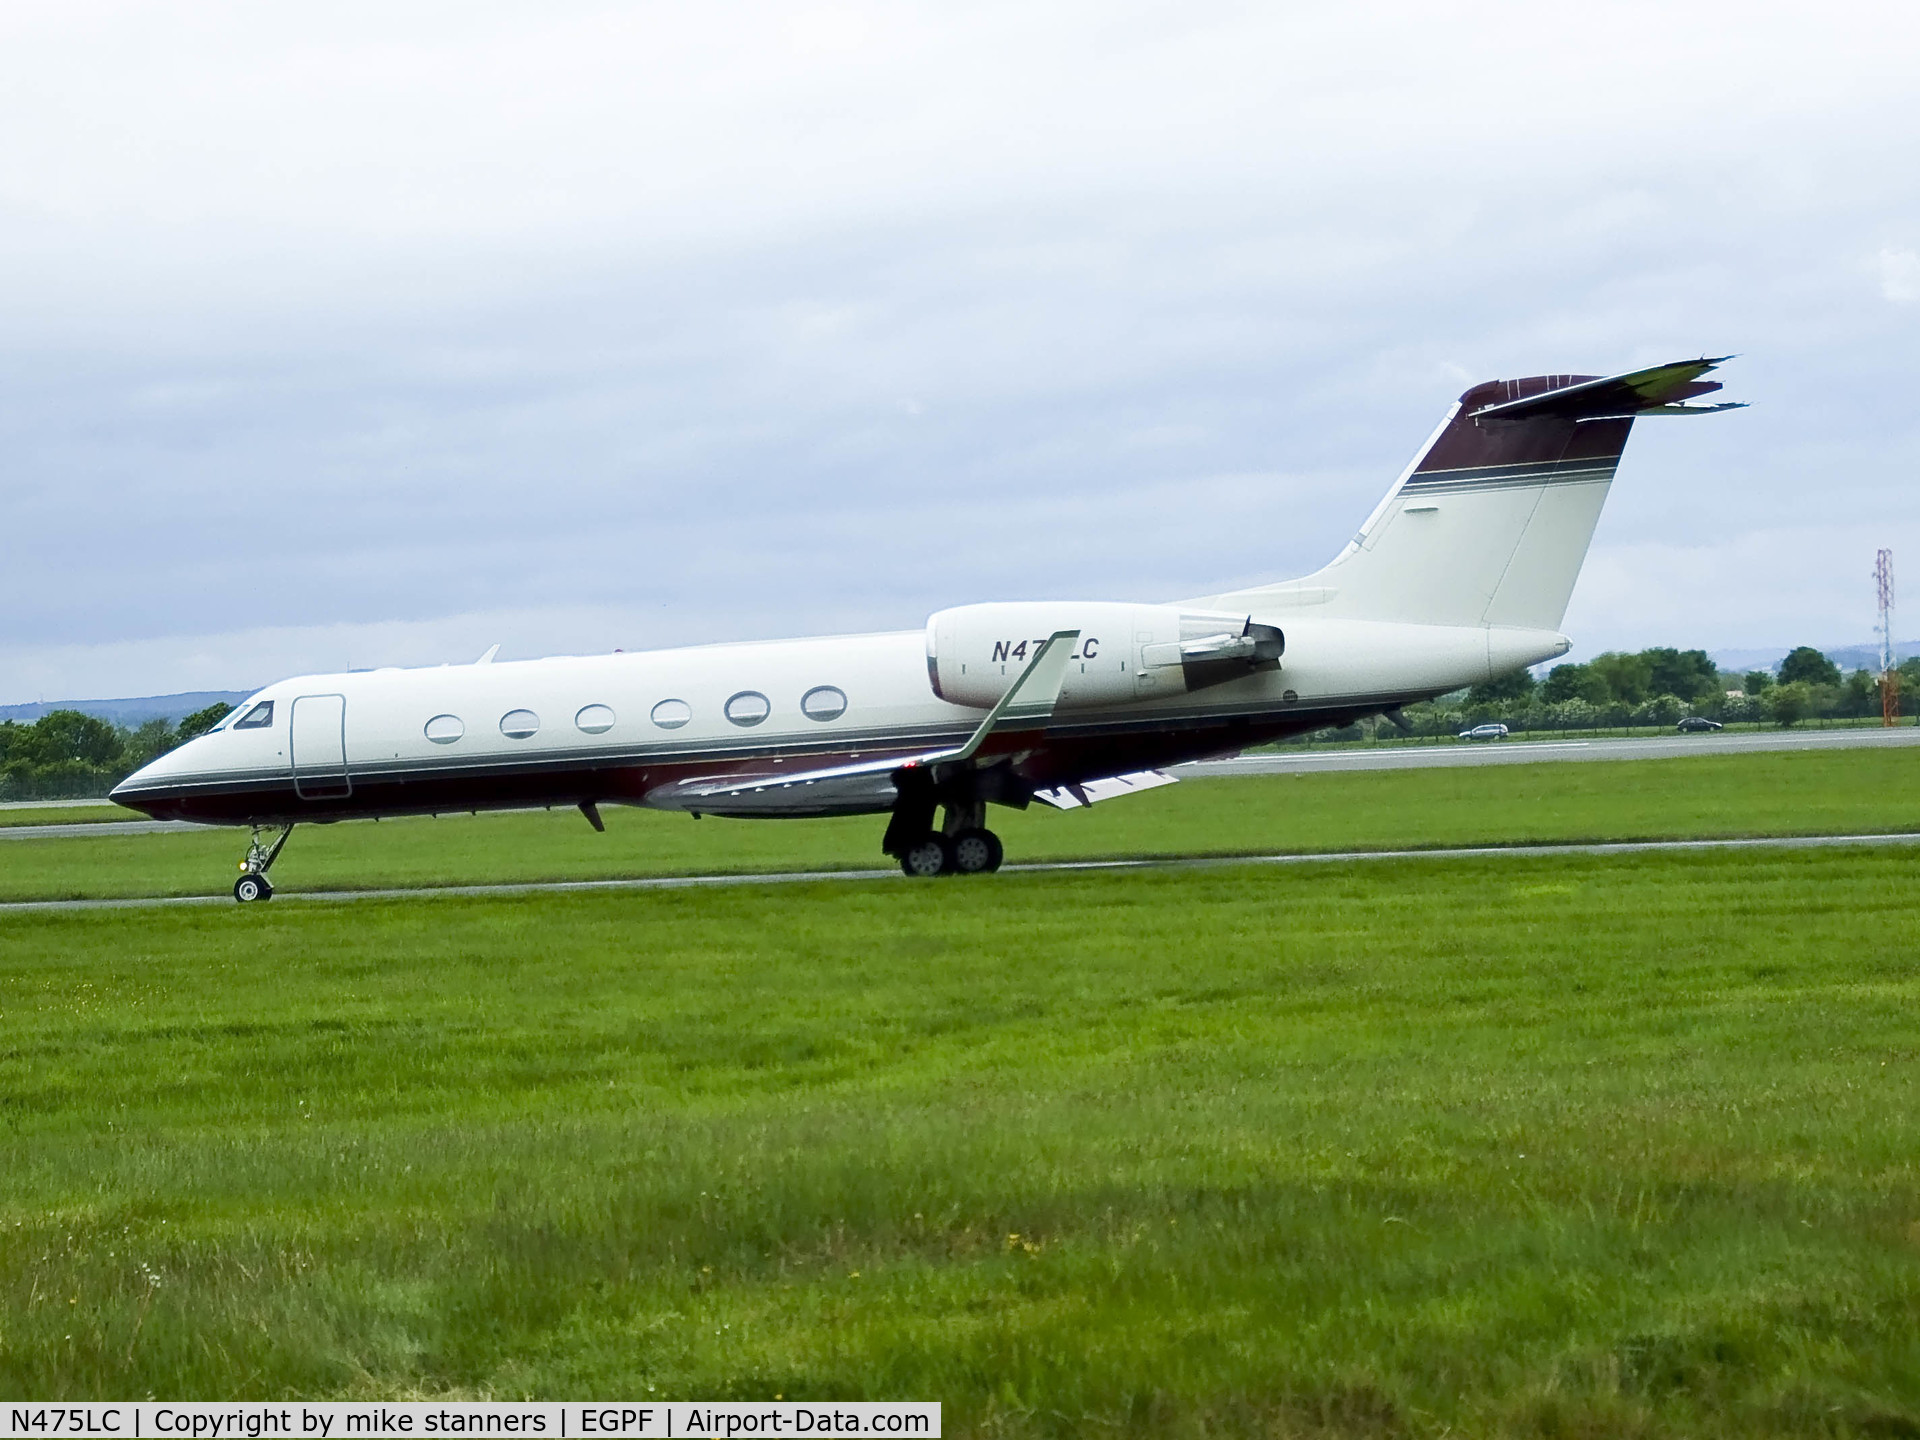 N475LC, 2002 Gulfstream Aerospace G-IV C/N 1472, seen here taxiing out at Glasgow 17/5/2008